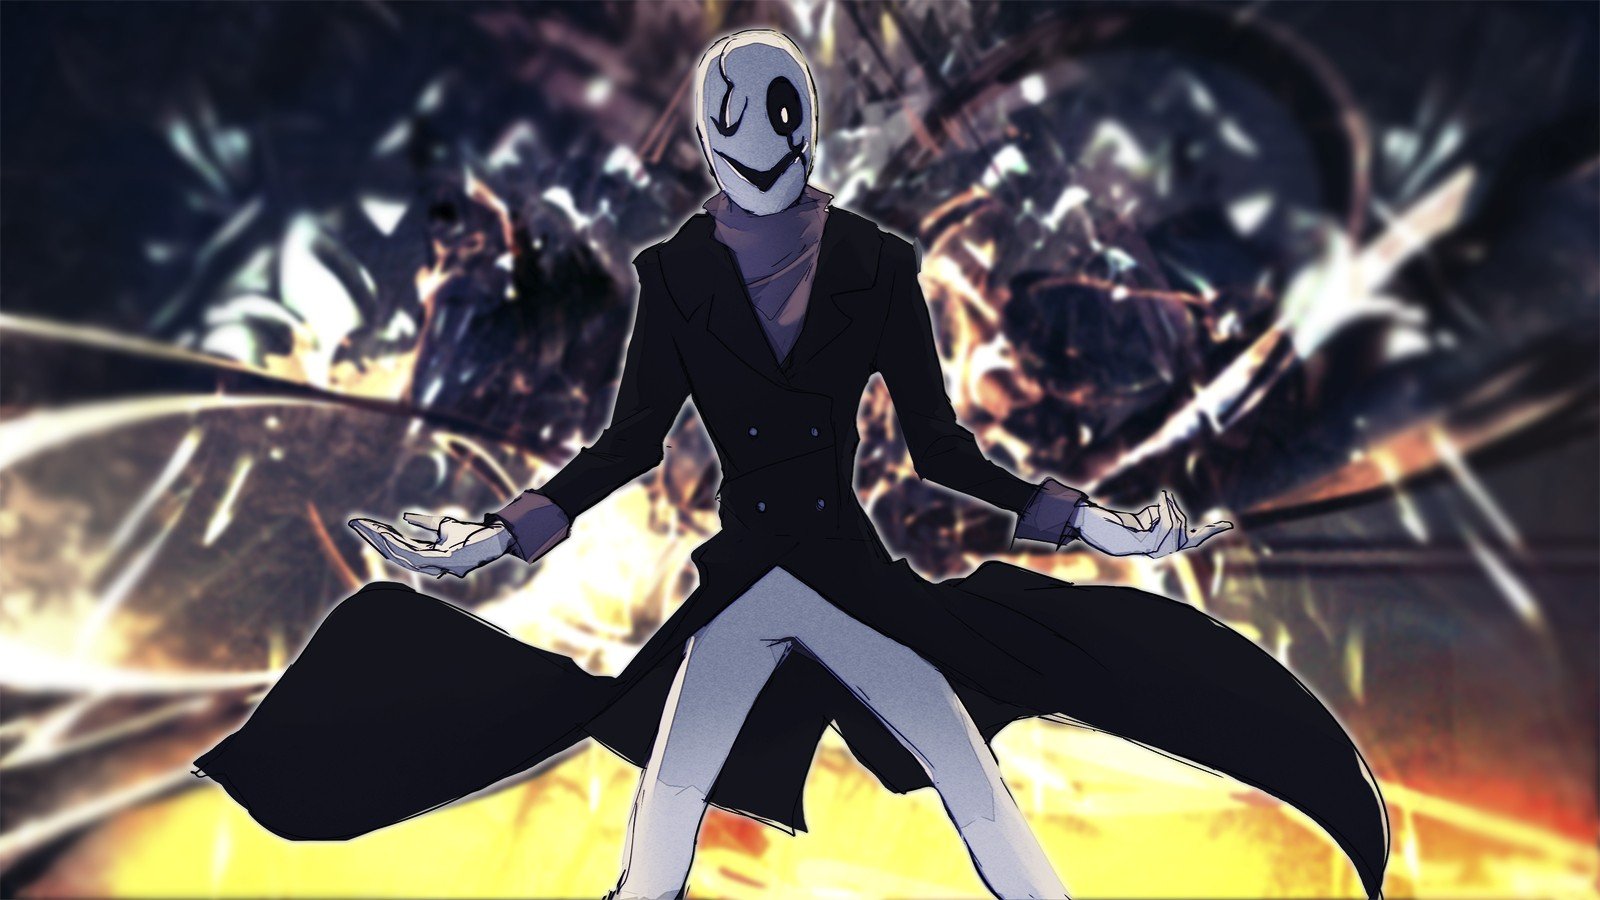 Undertale, W.D Gaster HD Wallpapers / Desktop and Mobile Images & Photos